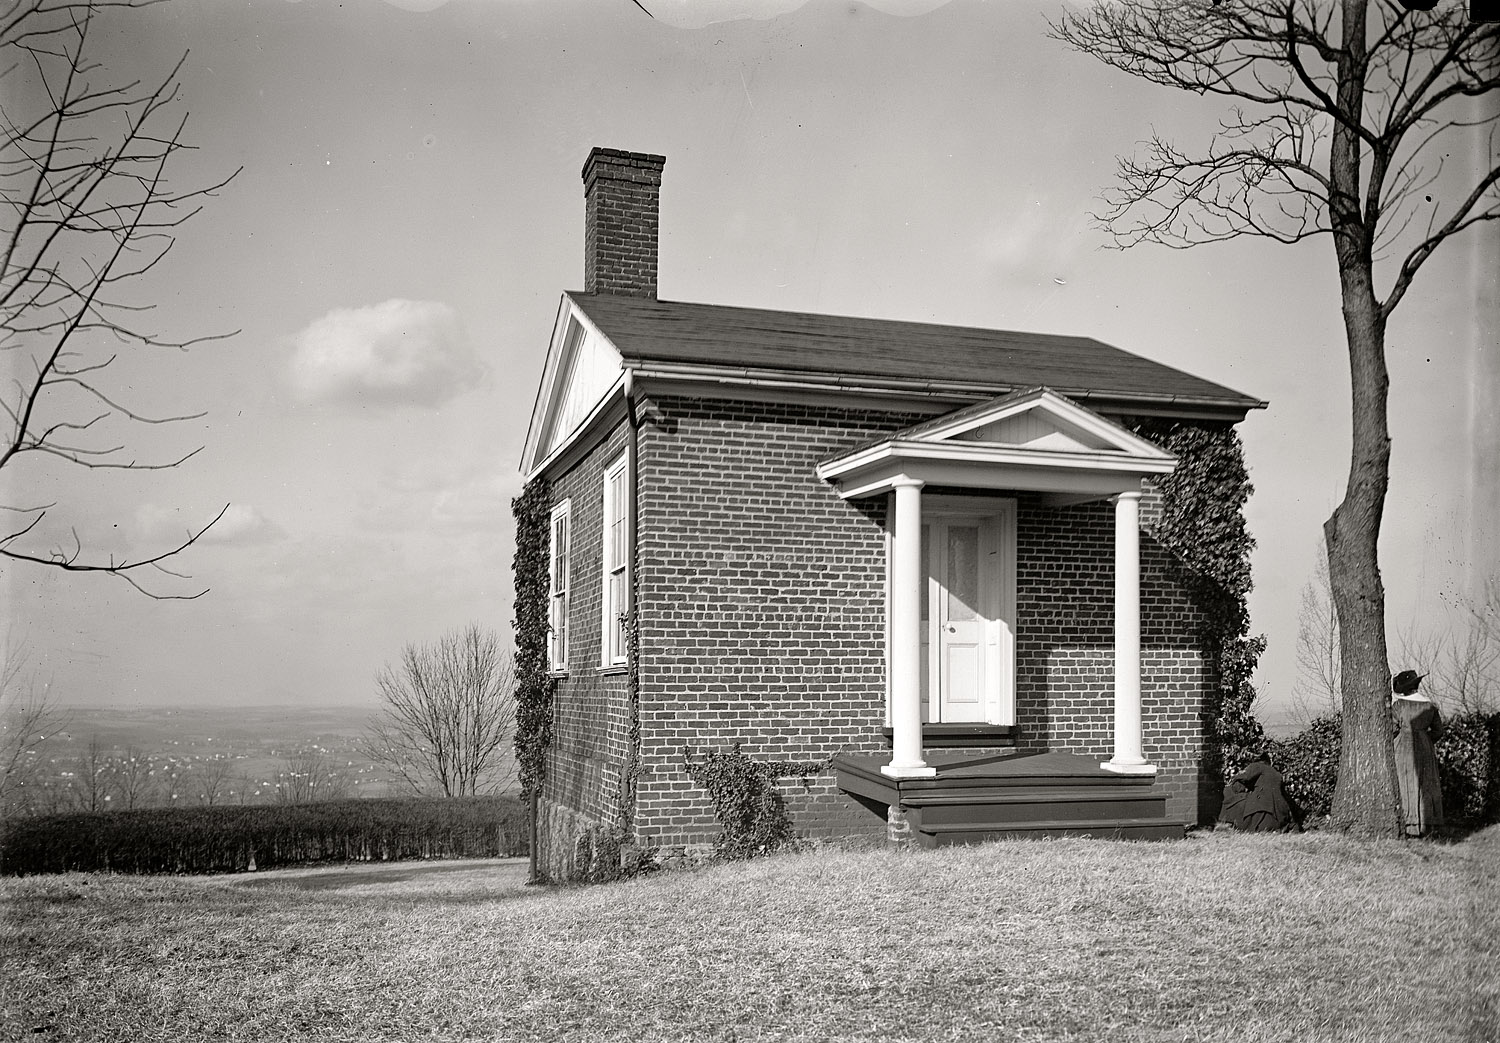 Albemarle County, Virginia, circa 1916. "Outbuilding, Monticello. Estate of Thomas Jefferson." This is the North Pavilion, the last building constructed at Monticello. Harris & Ewing Collection glass negative. View full size.